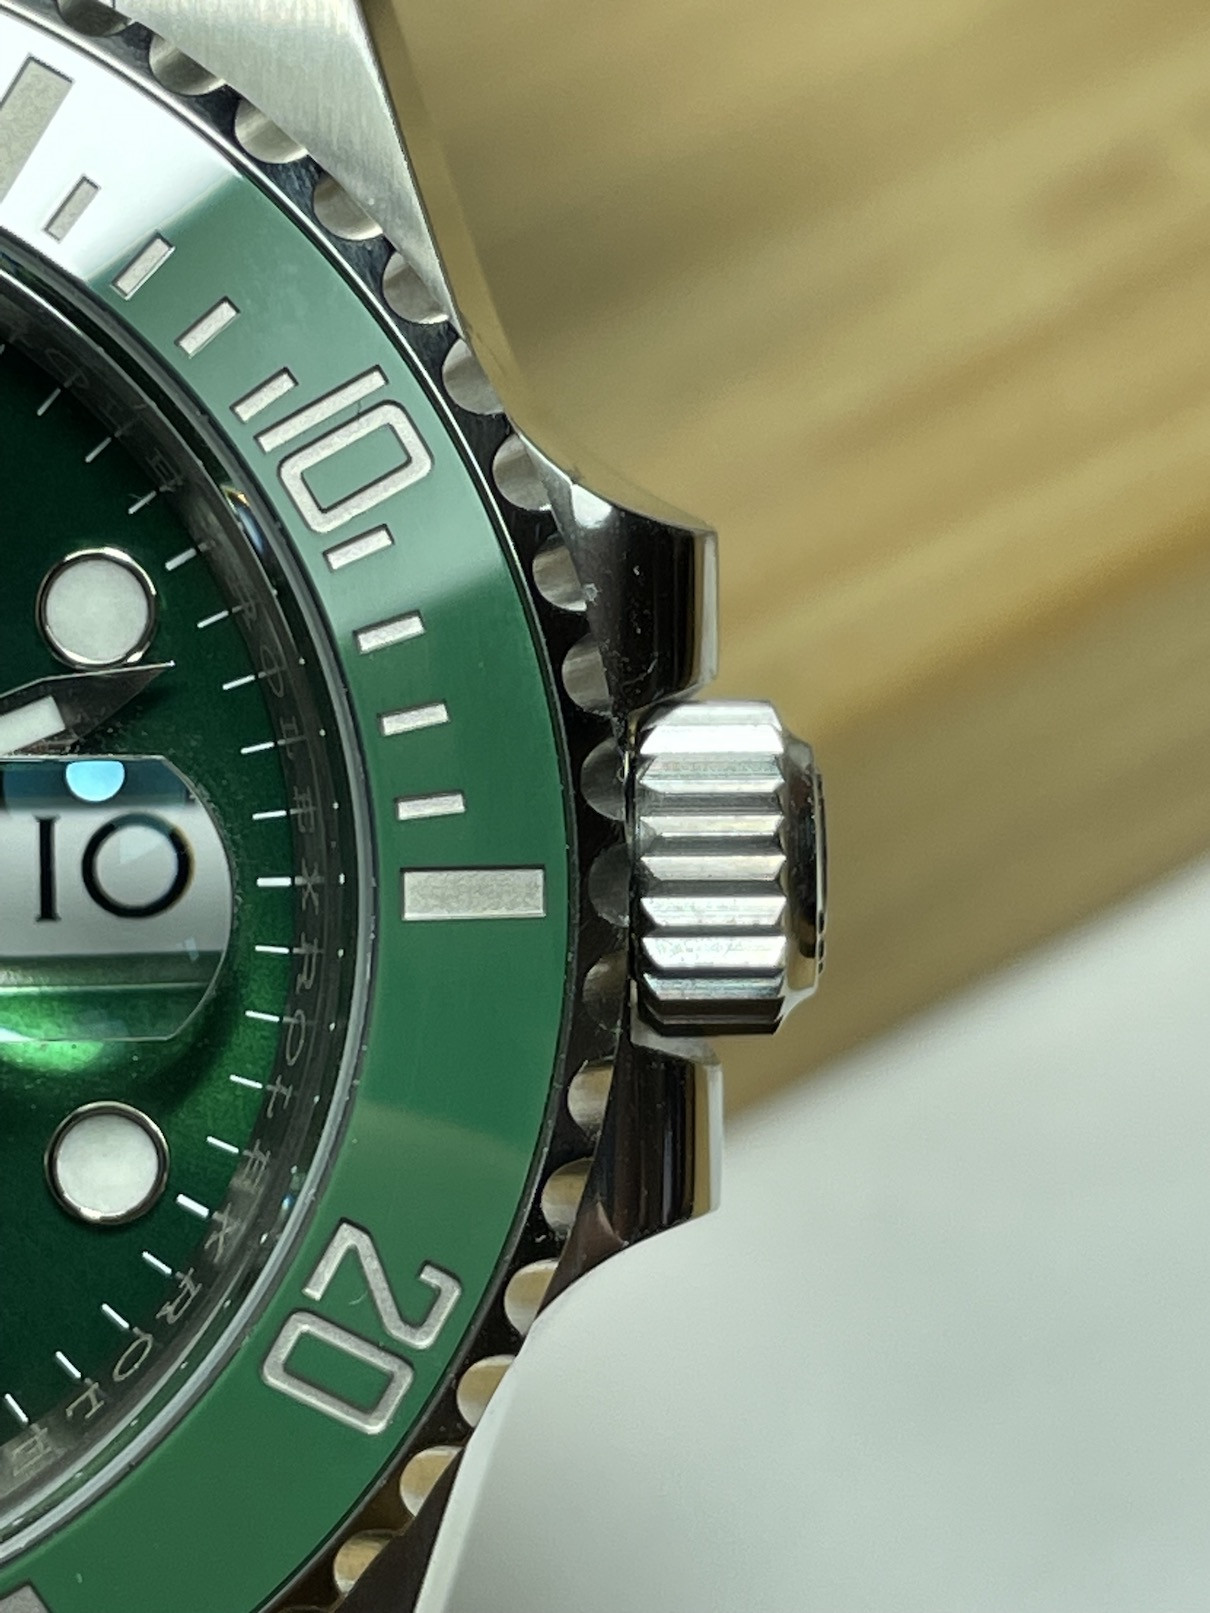 REVIEW: The Rolex Submariner 116610LV Hulk